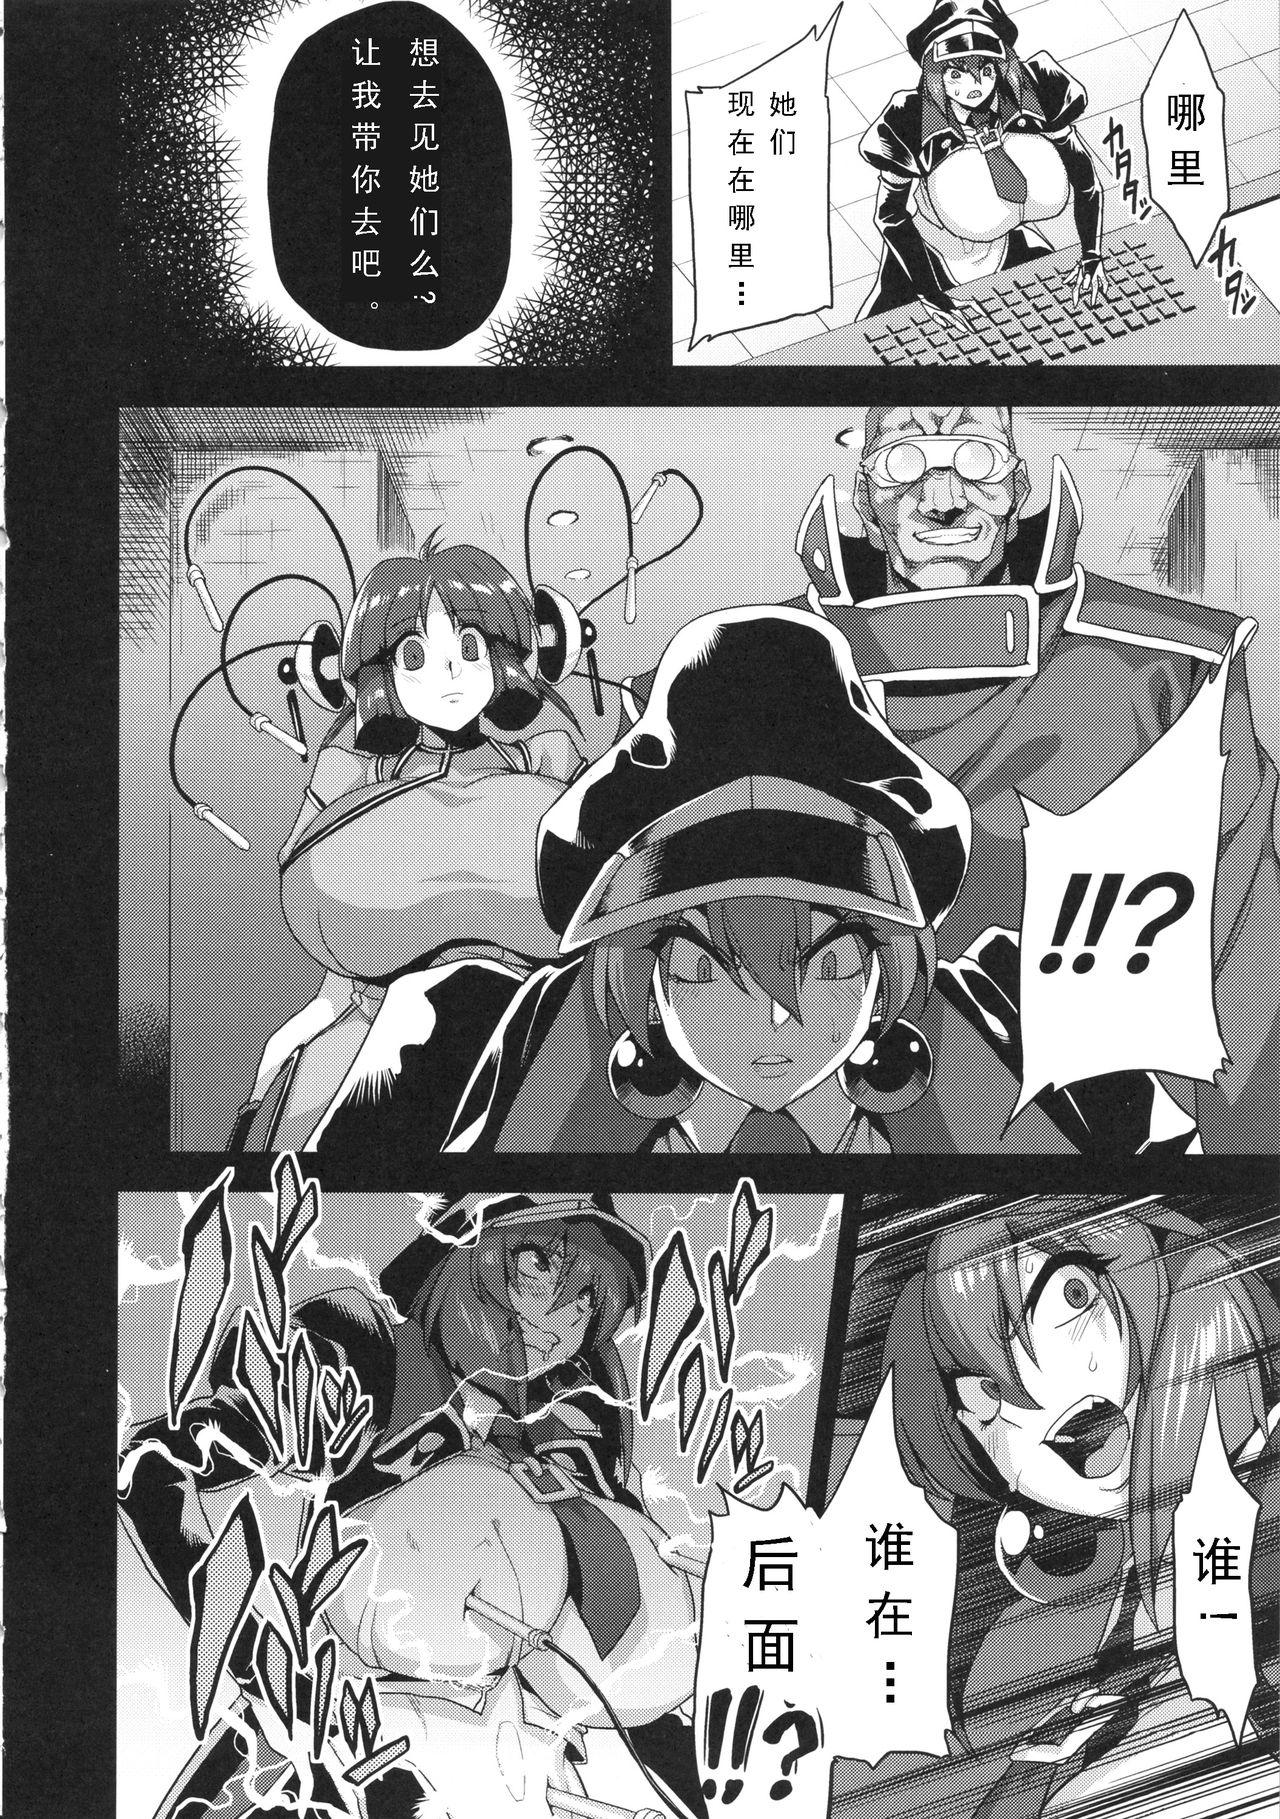 Gilf Hentai Marionette 2 - Saber marionette Usa - Page 9